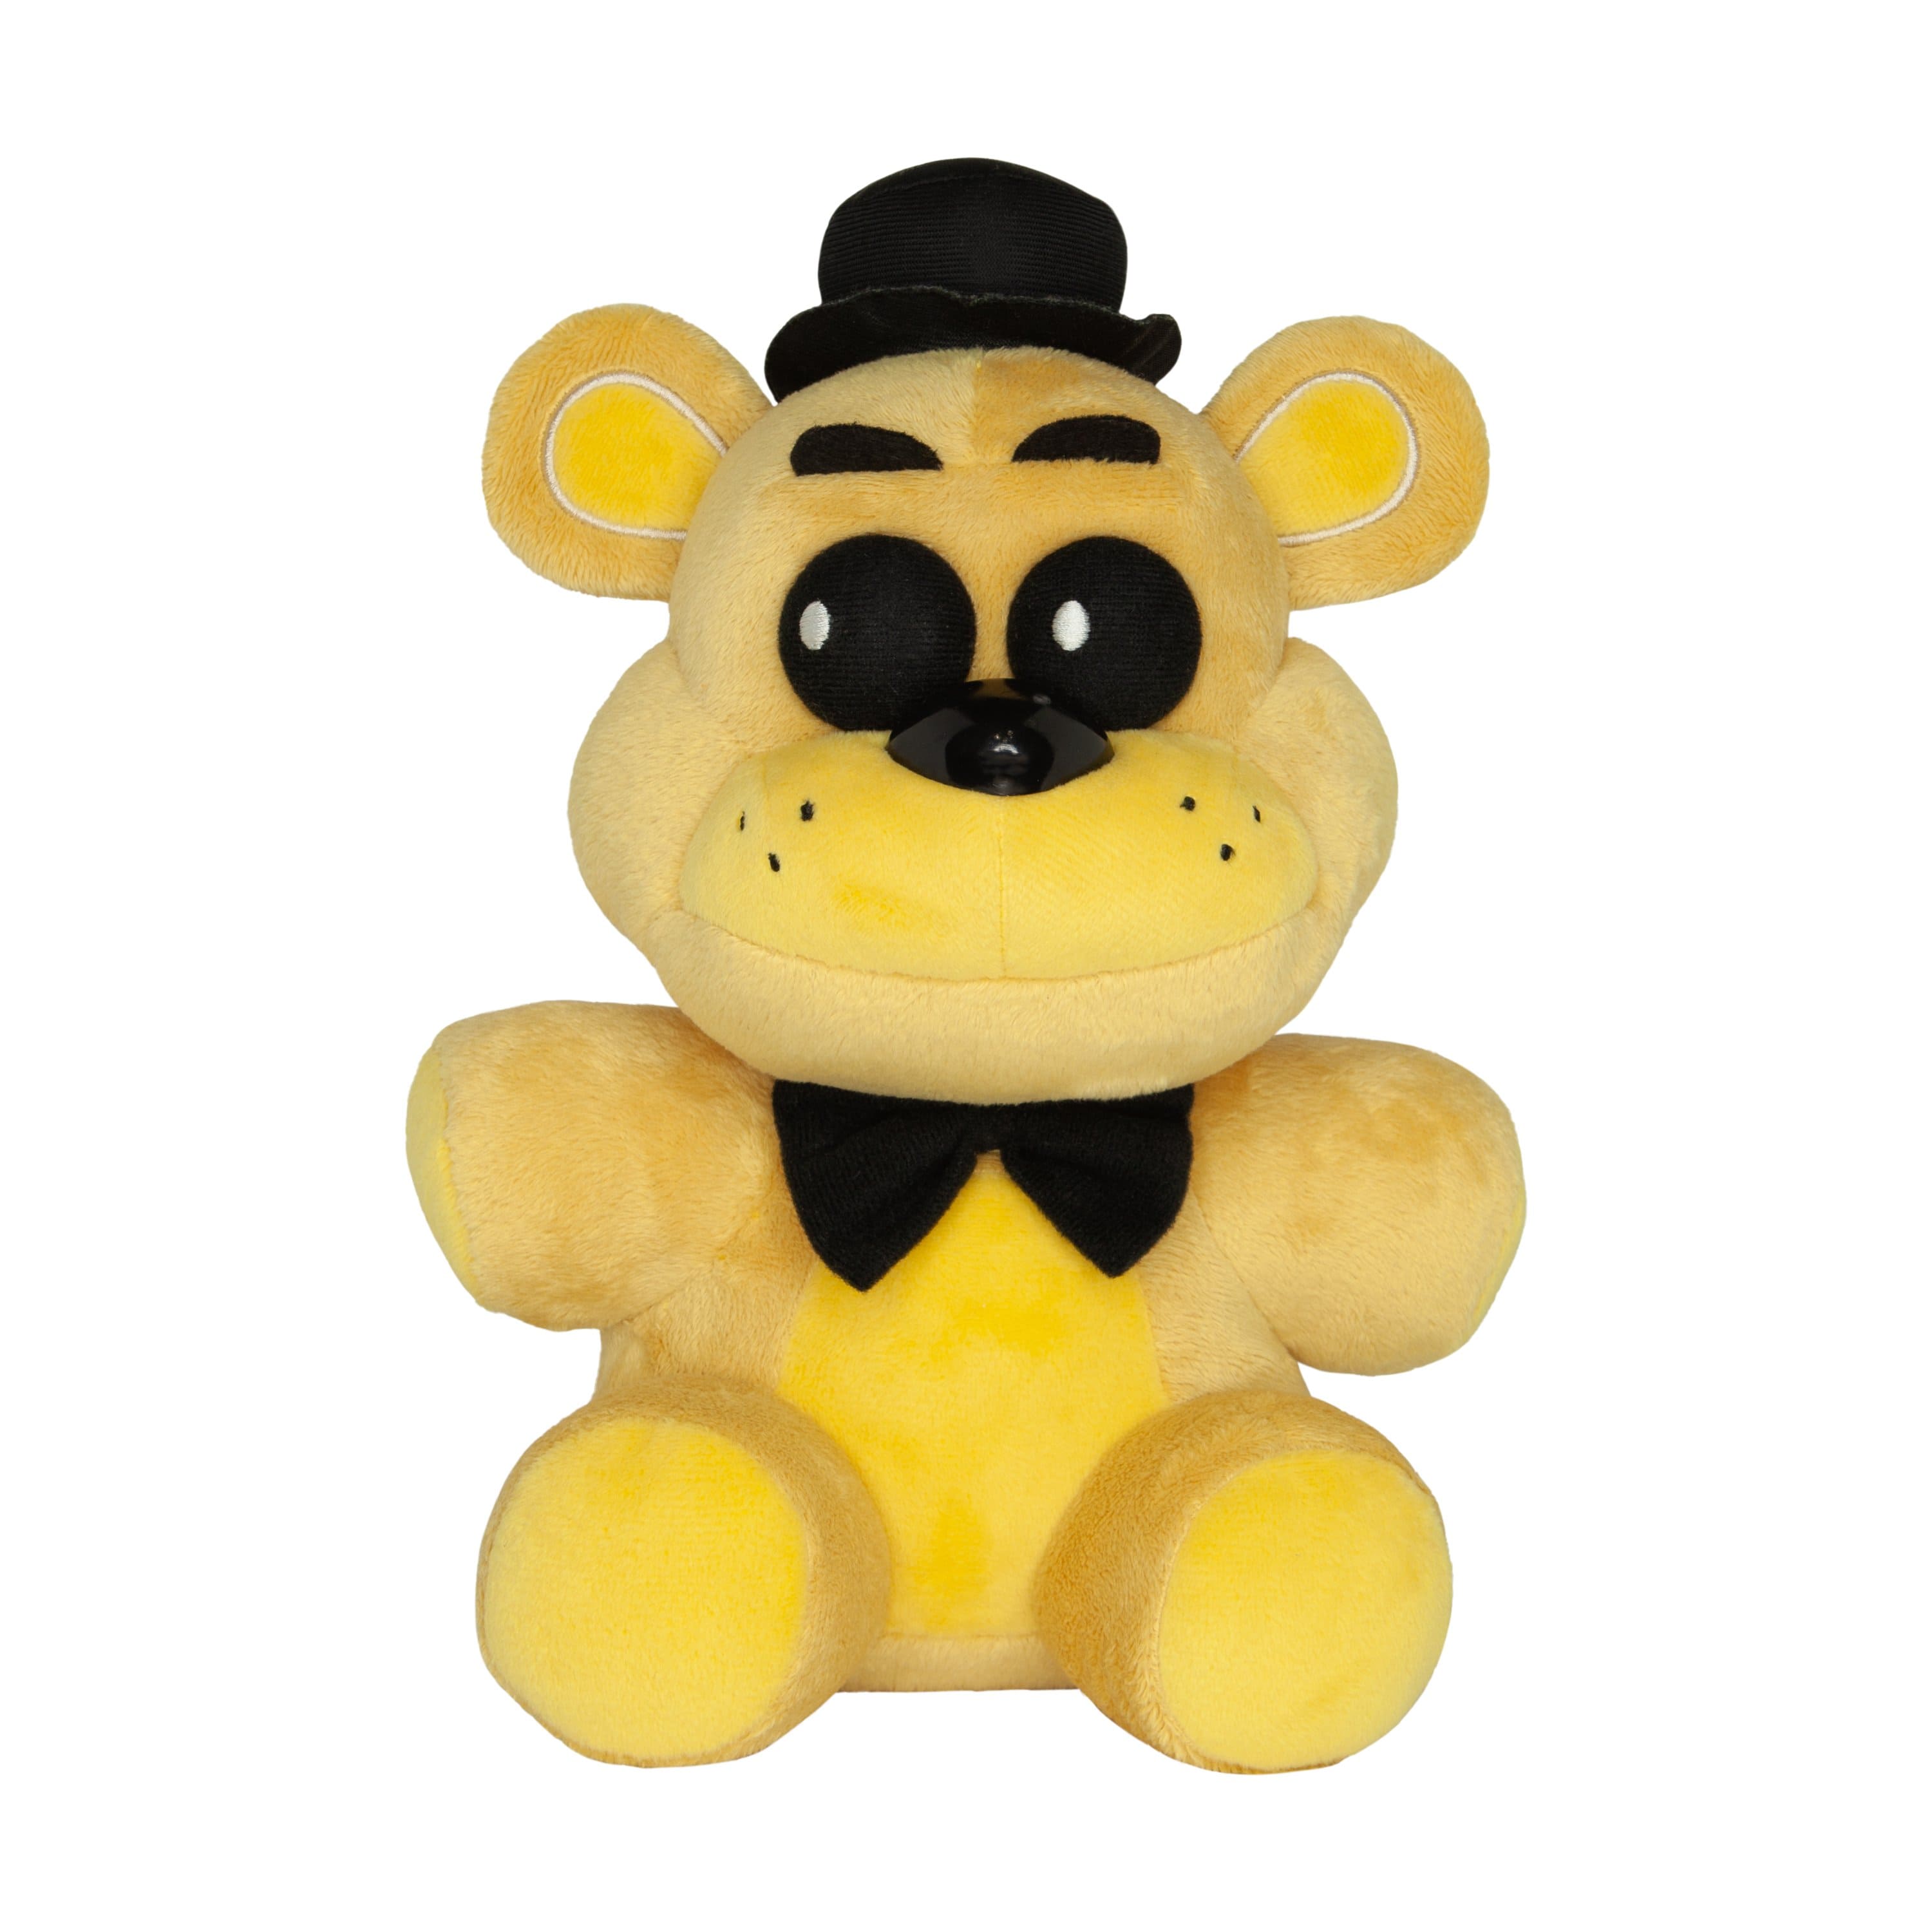 Bring Home the Charming Golden Freddy Plush from Five Nights at Freddy's